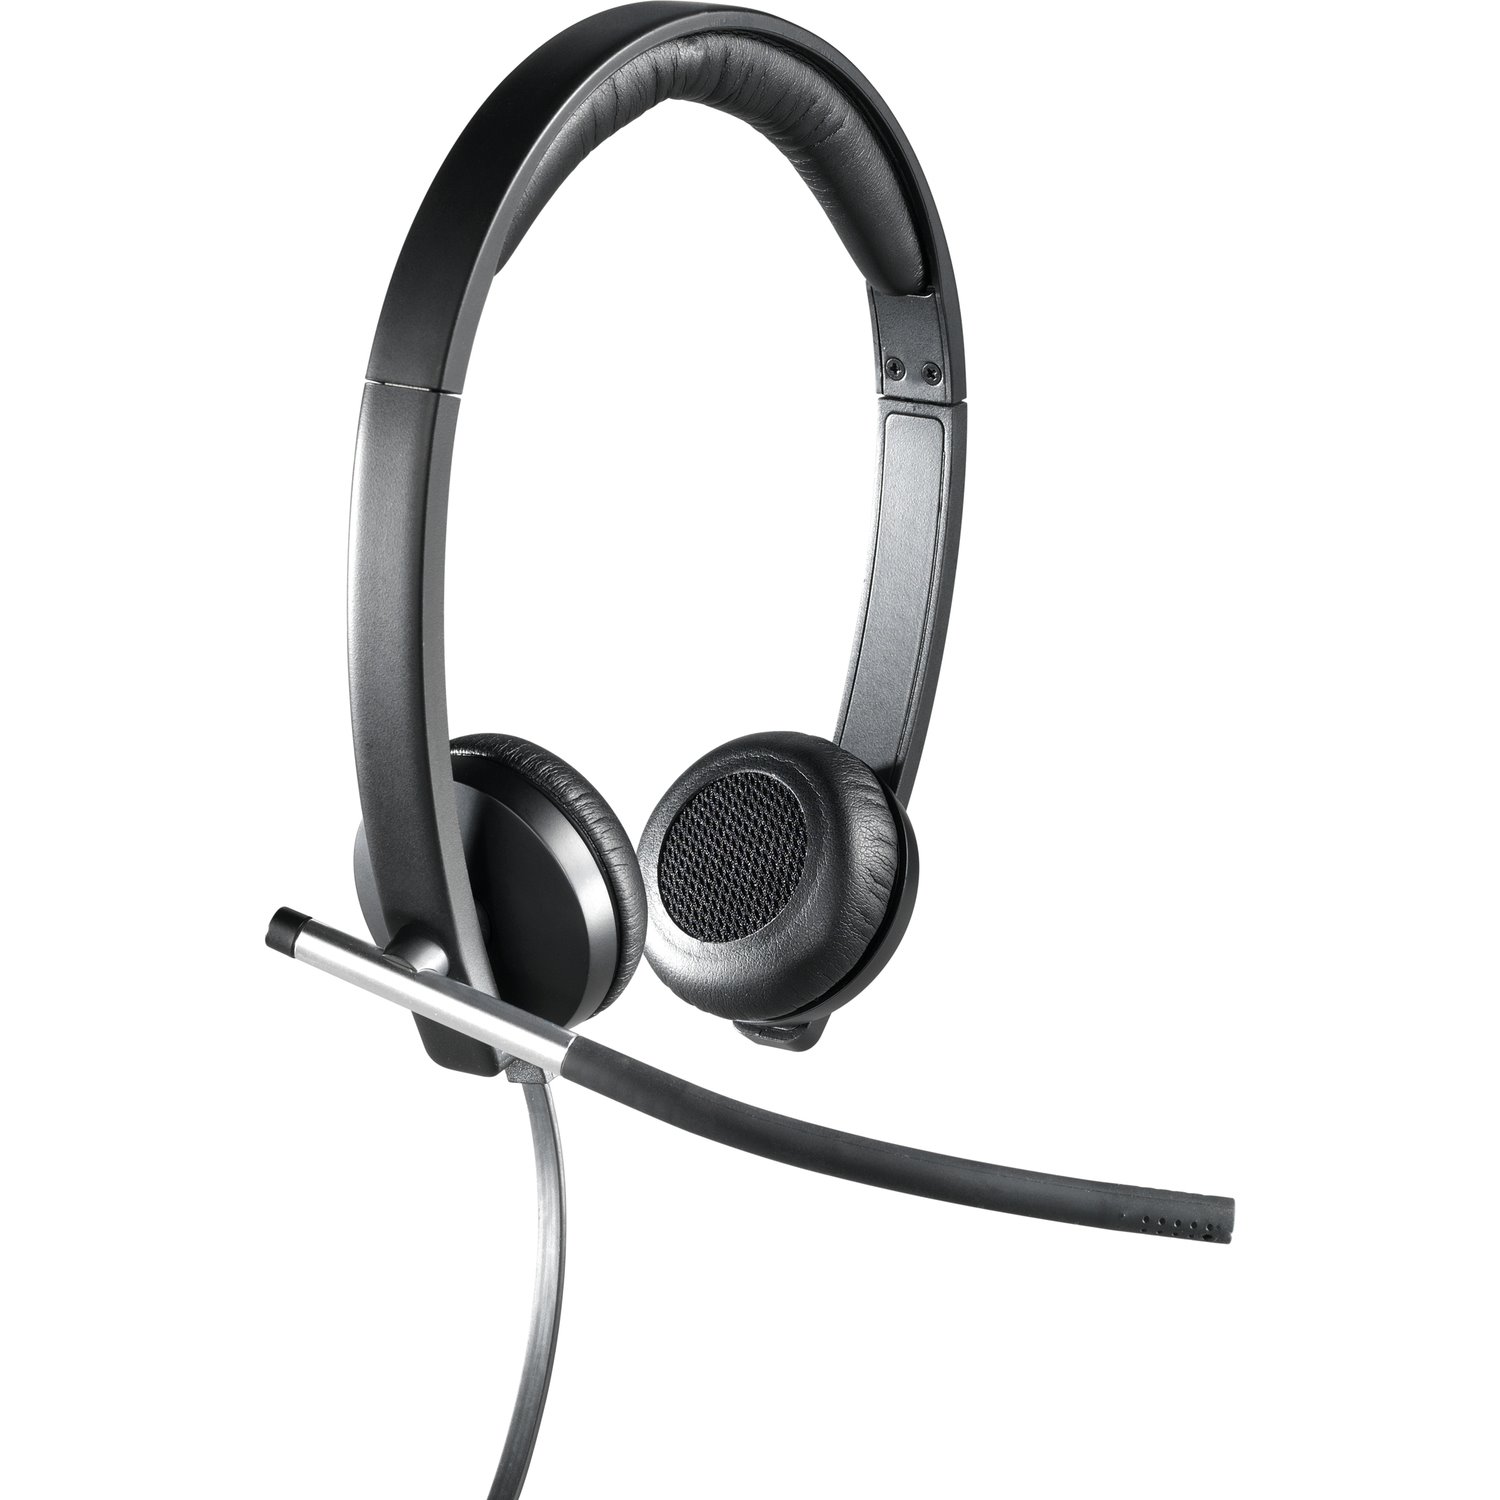 Logitech H650e Wired Over-the-head Stereo Headset